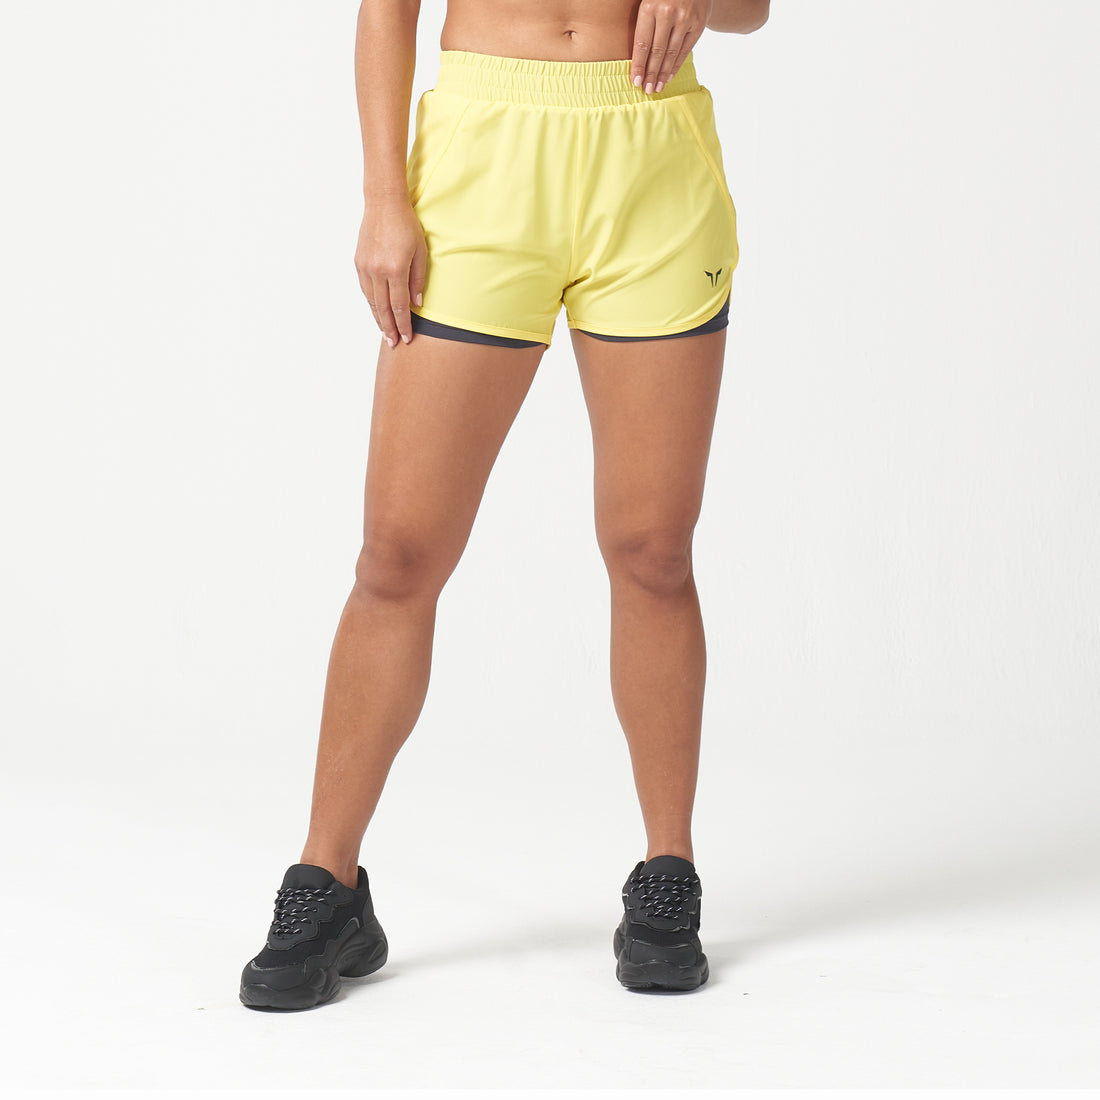 AE | LAB360° Never Stop 2-In-1 Shorts - Illuminating | Workout Shorts ...